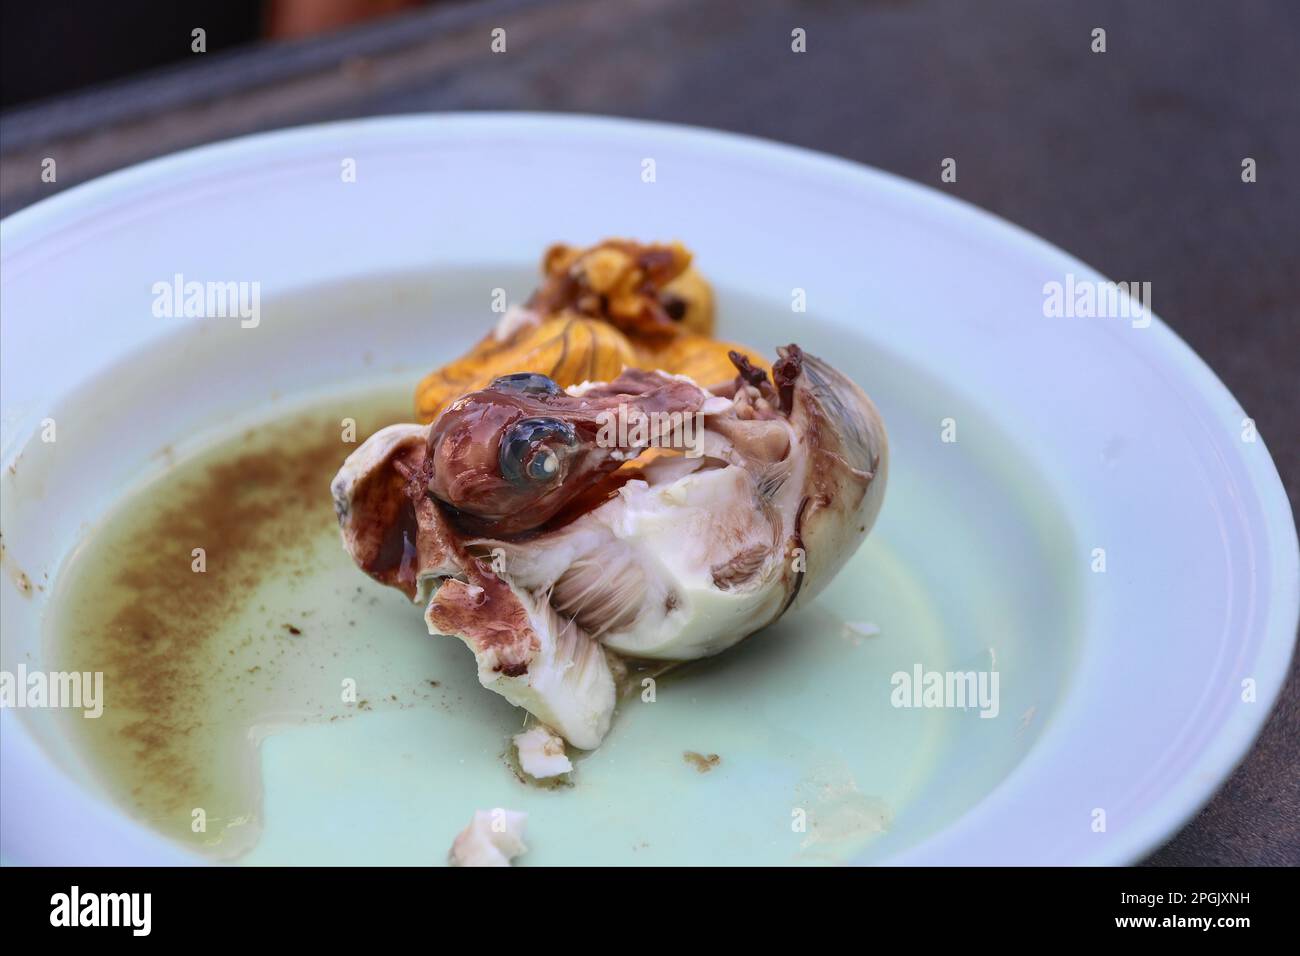 Balut egg : boiled duck embryo, fertilized eggs, asian aphrodisiac culinary specialty (street food) popular in Philippines, Cambodia, Vietnam, China Stock Photo